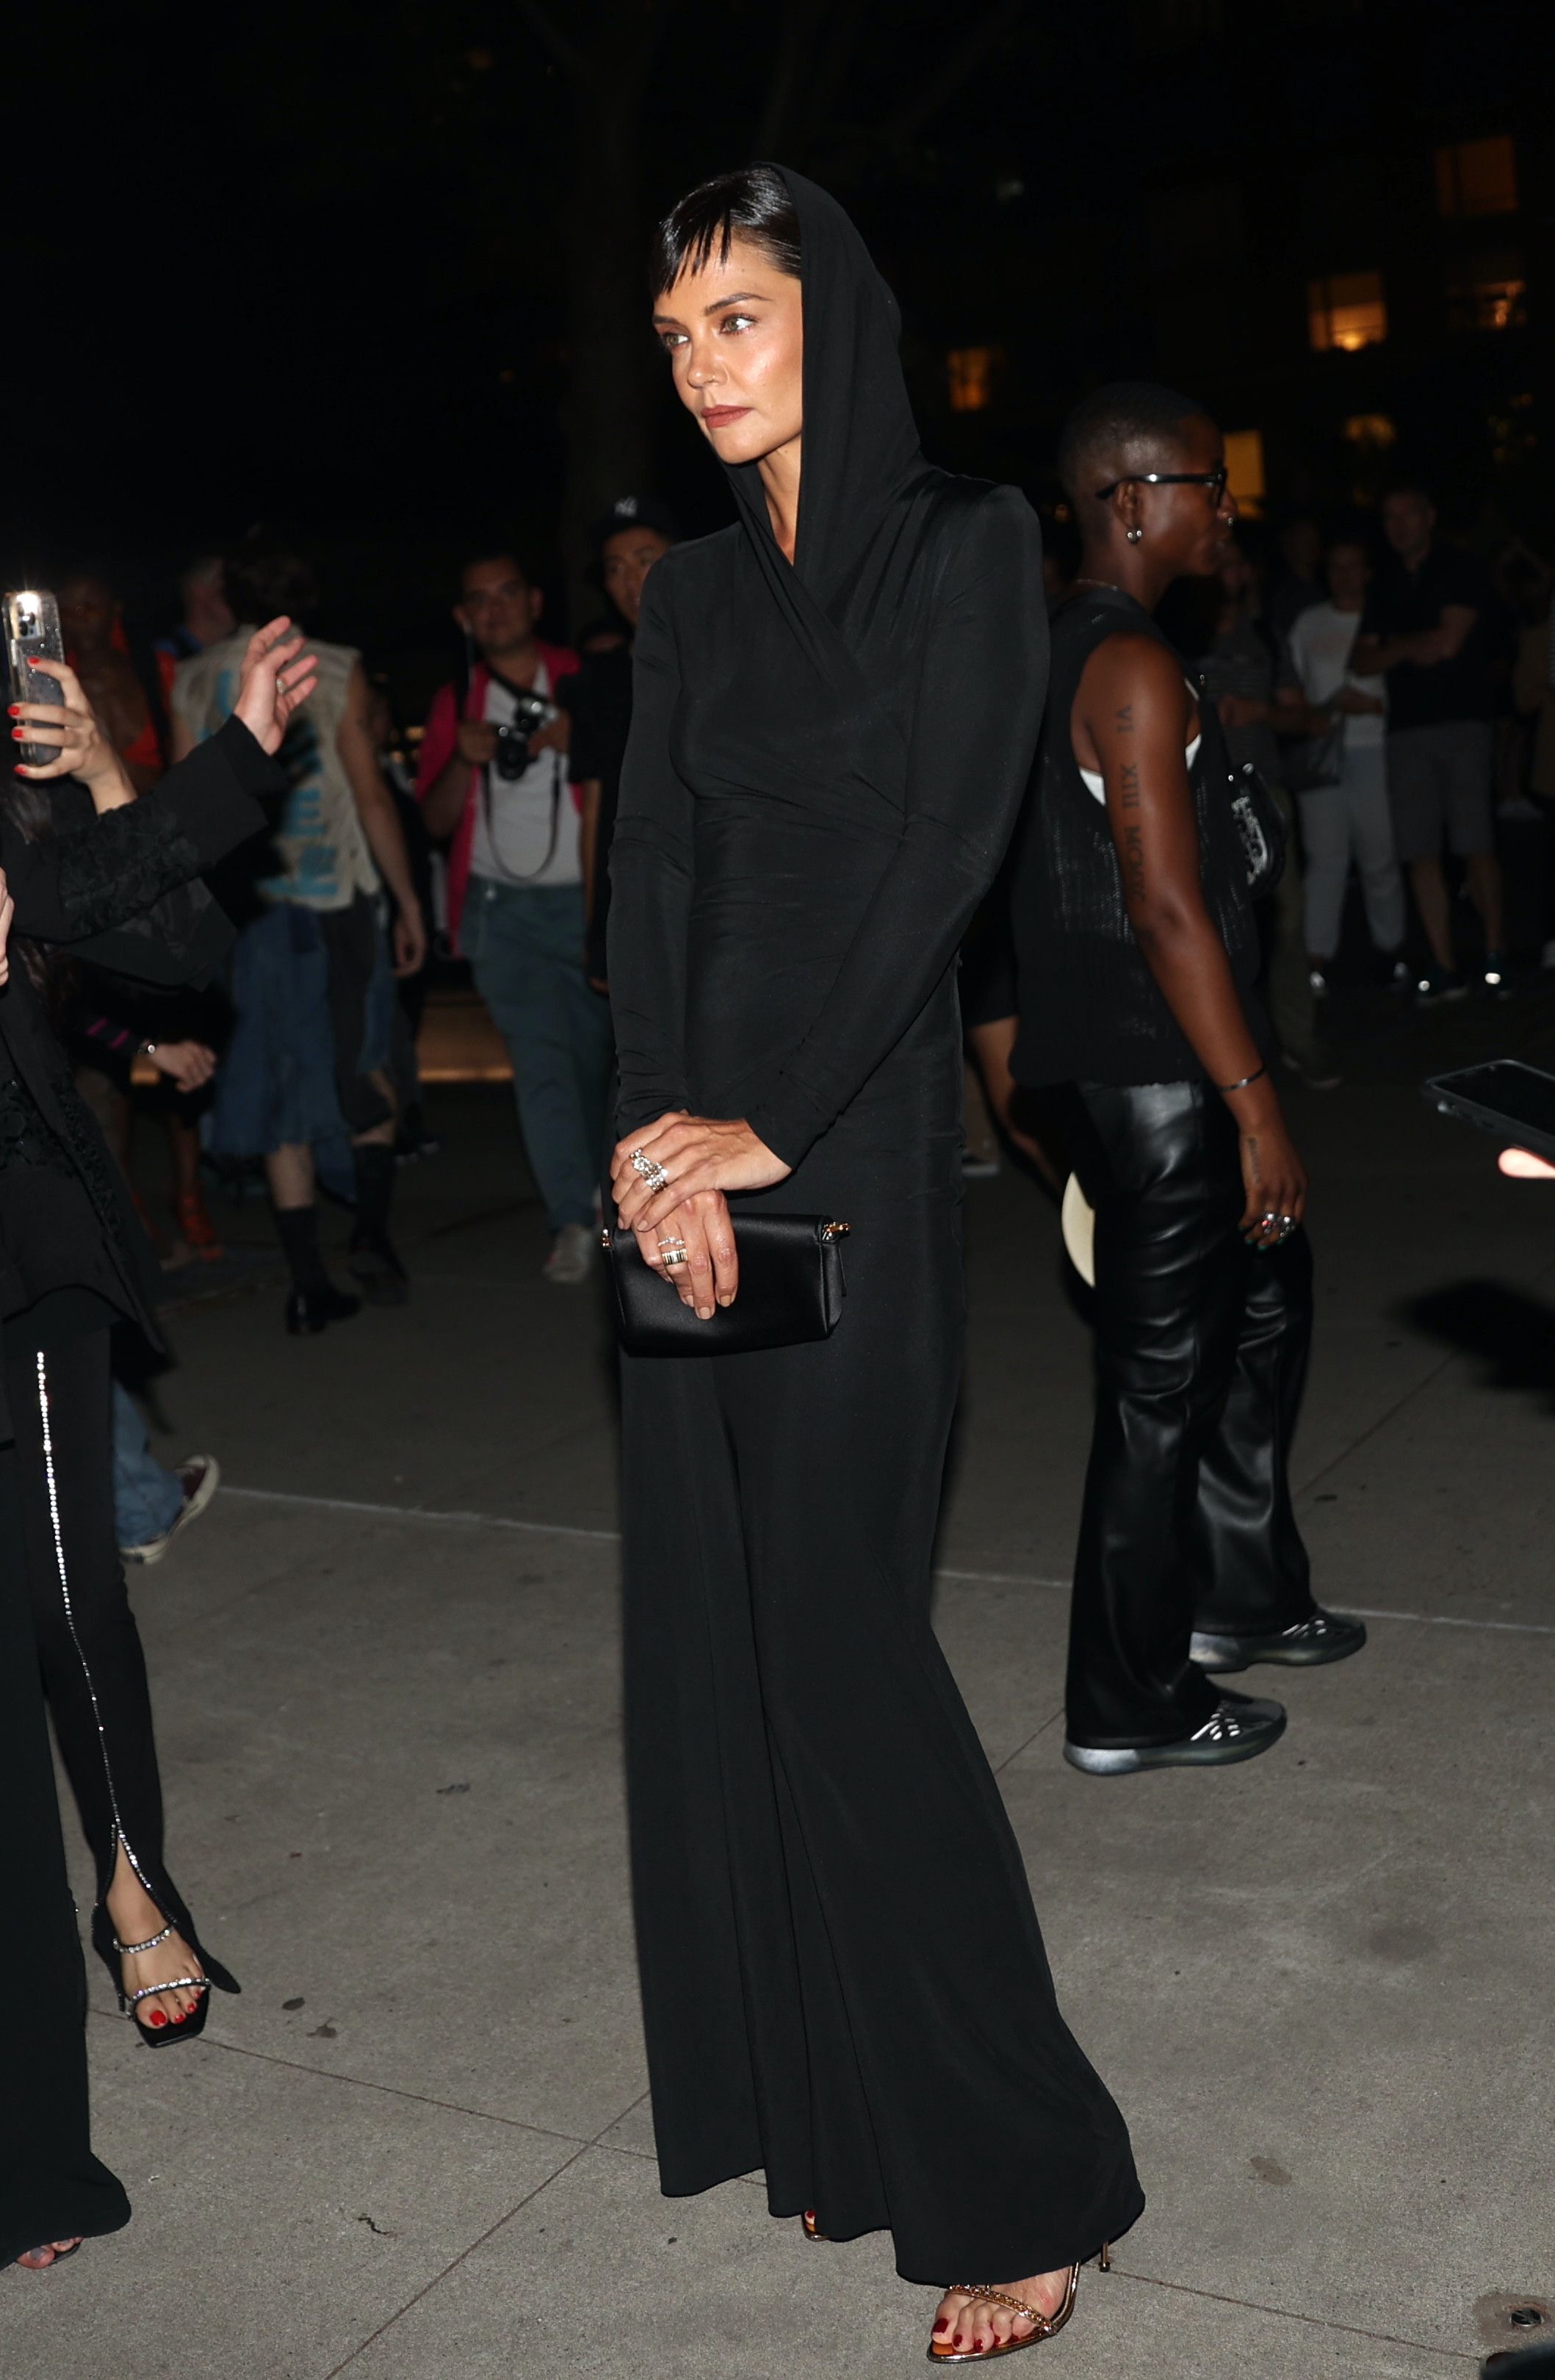 Katie Holmes Looked So Edgy in a Black Hooded Gown During NYFW